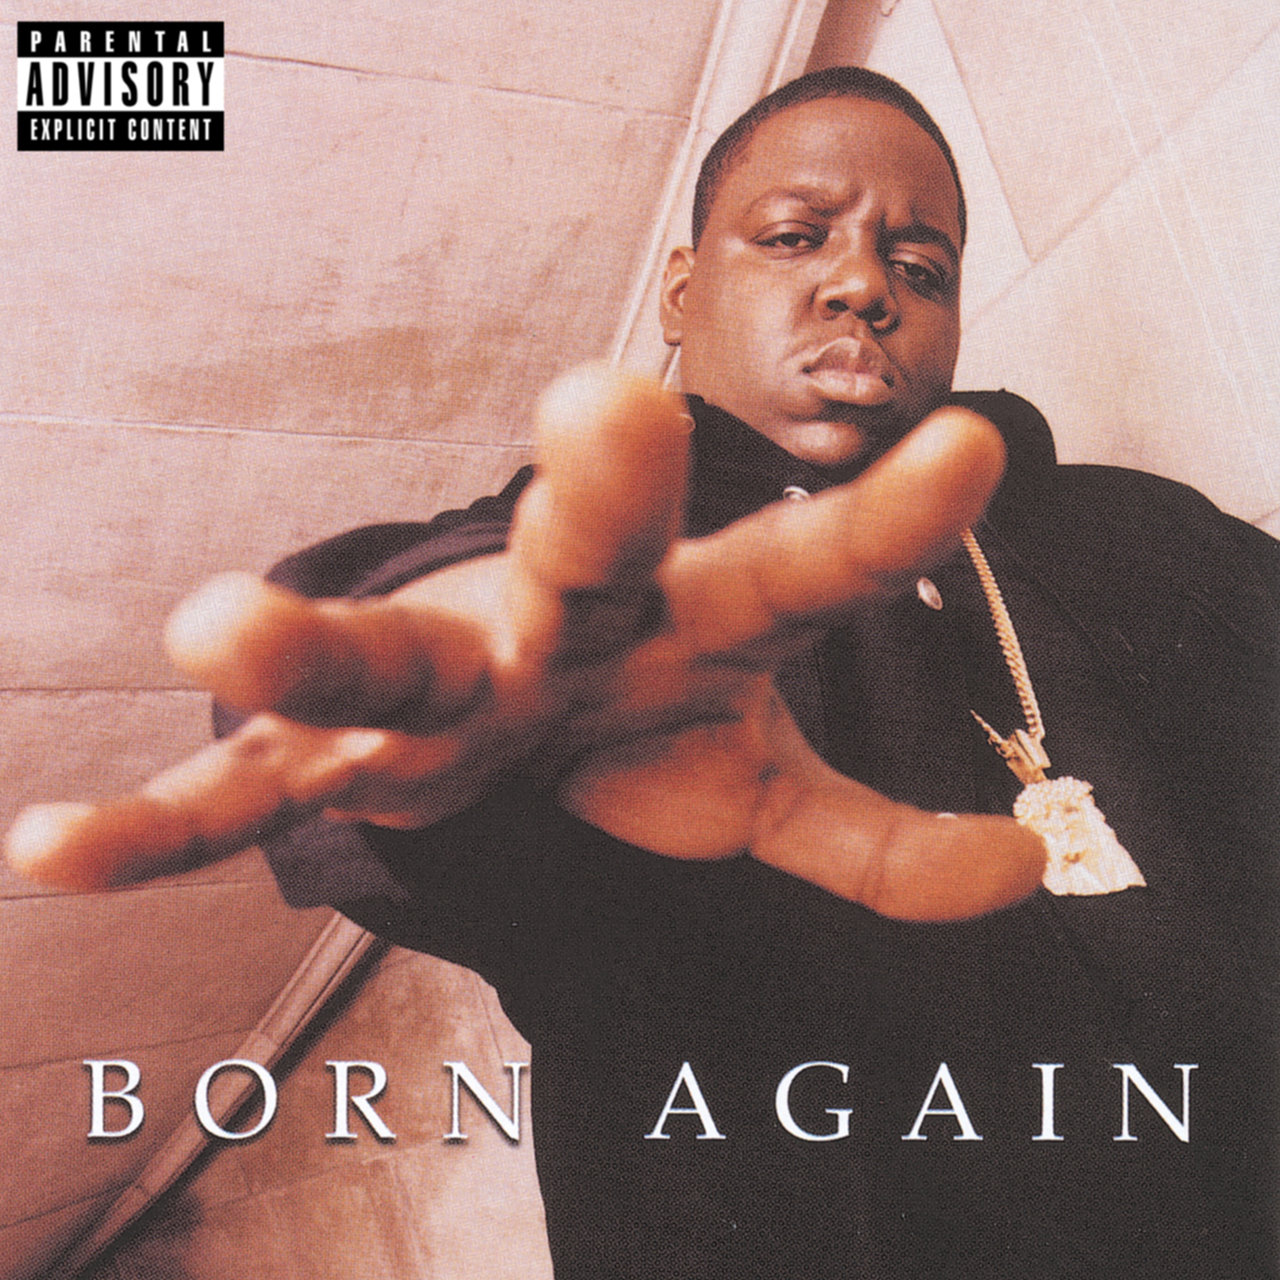 The Notorious B.I.G. - Born Again (Cover)